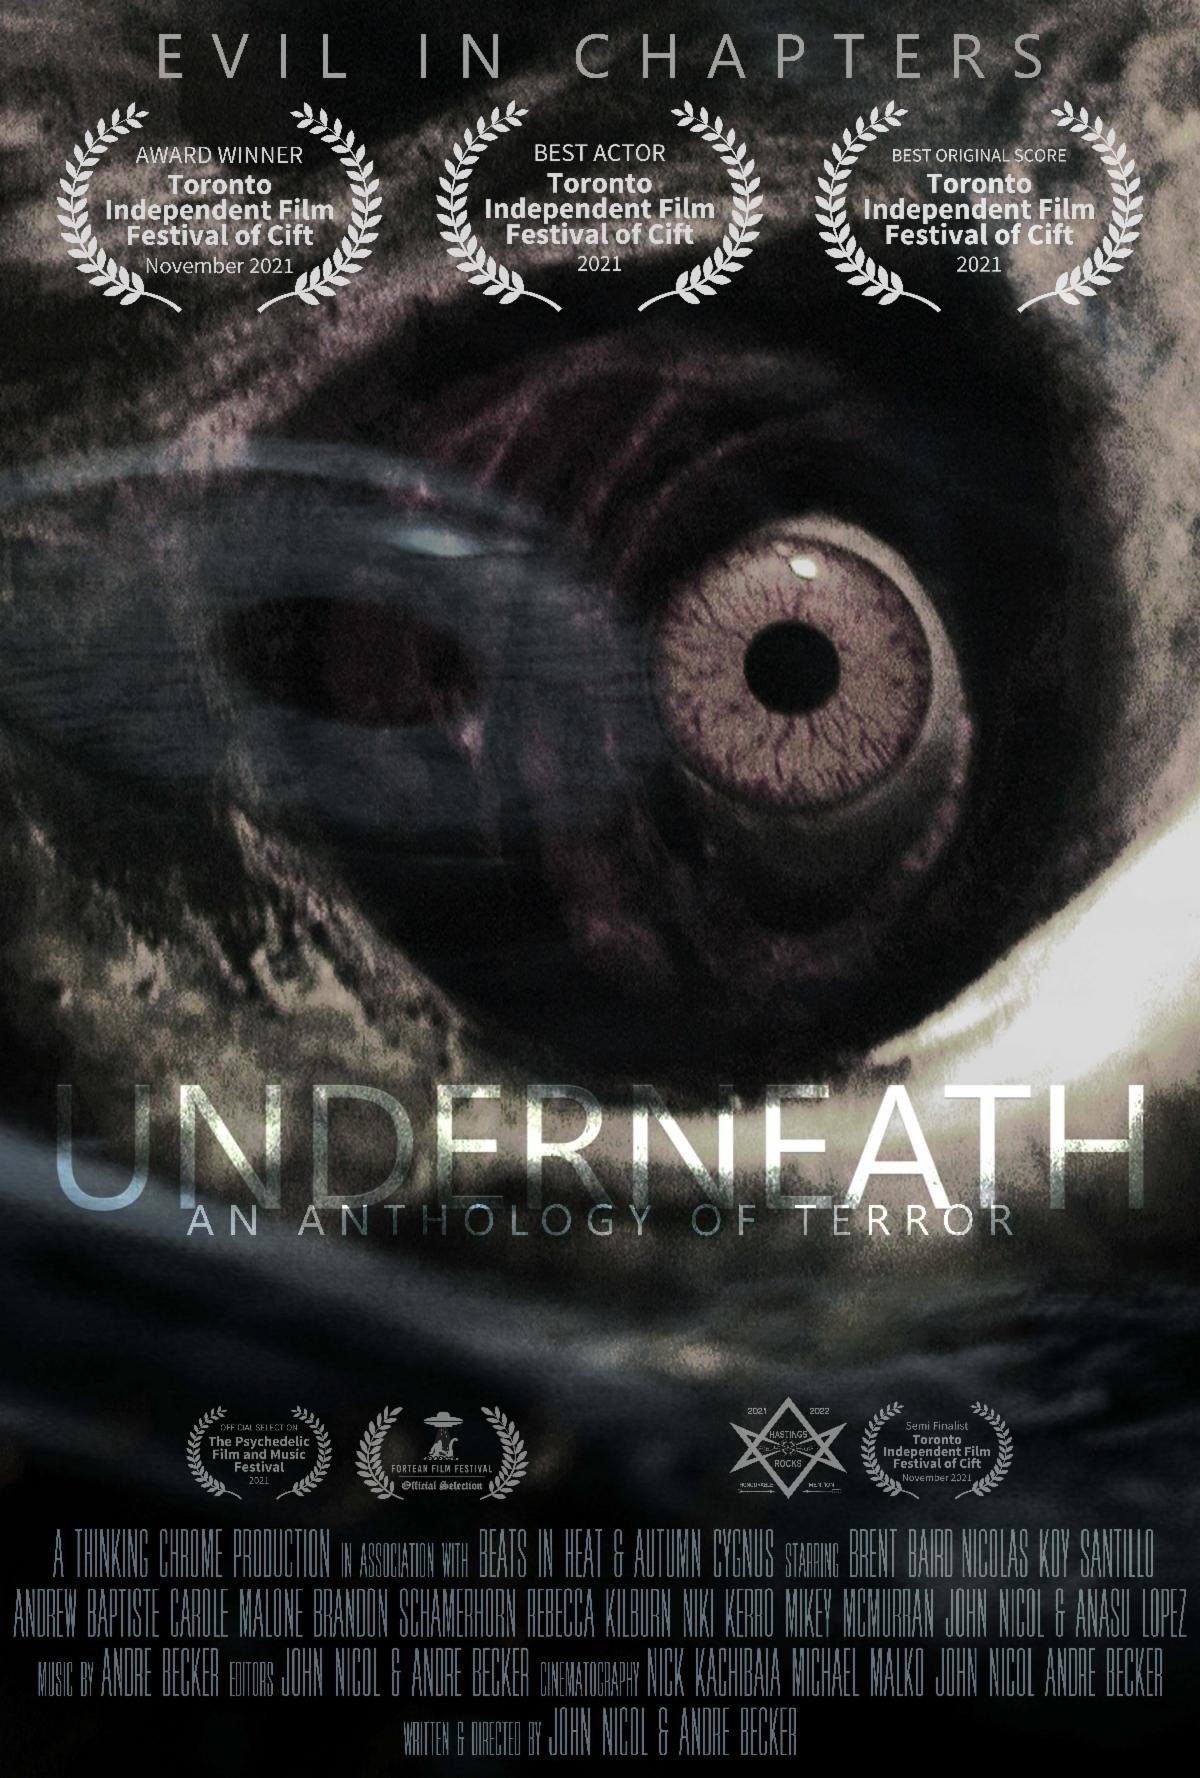 UNDERNEATH: An Anthology Of Terror